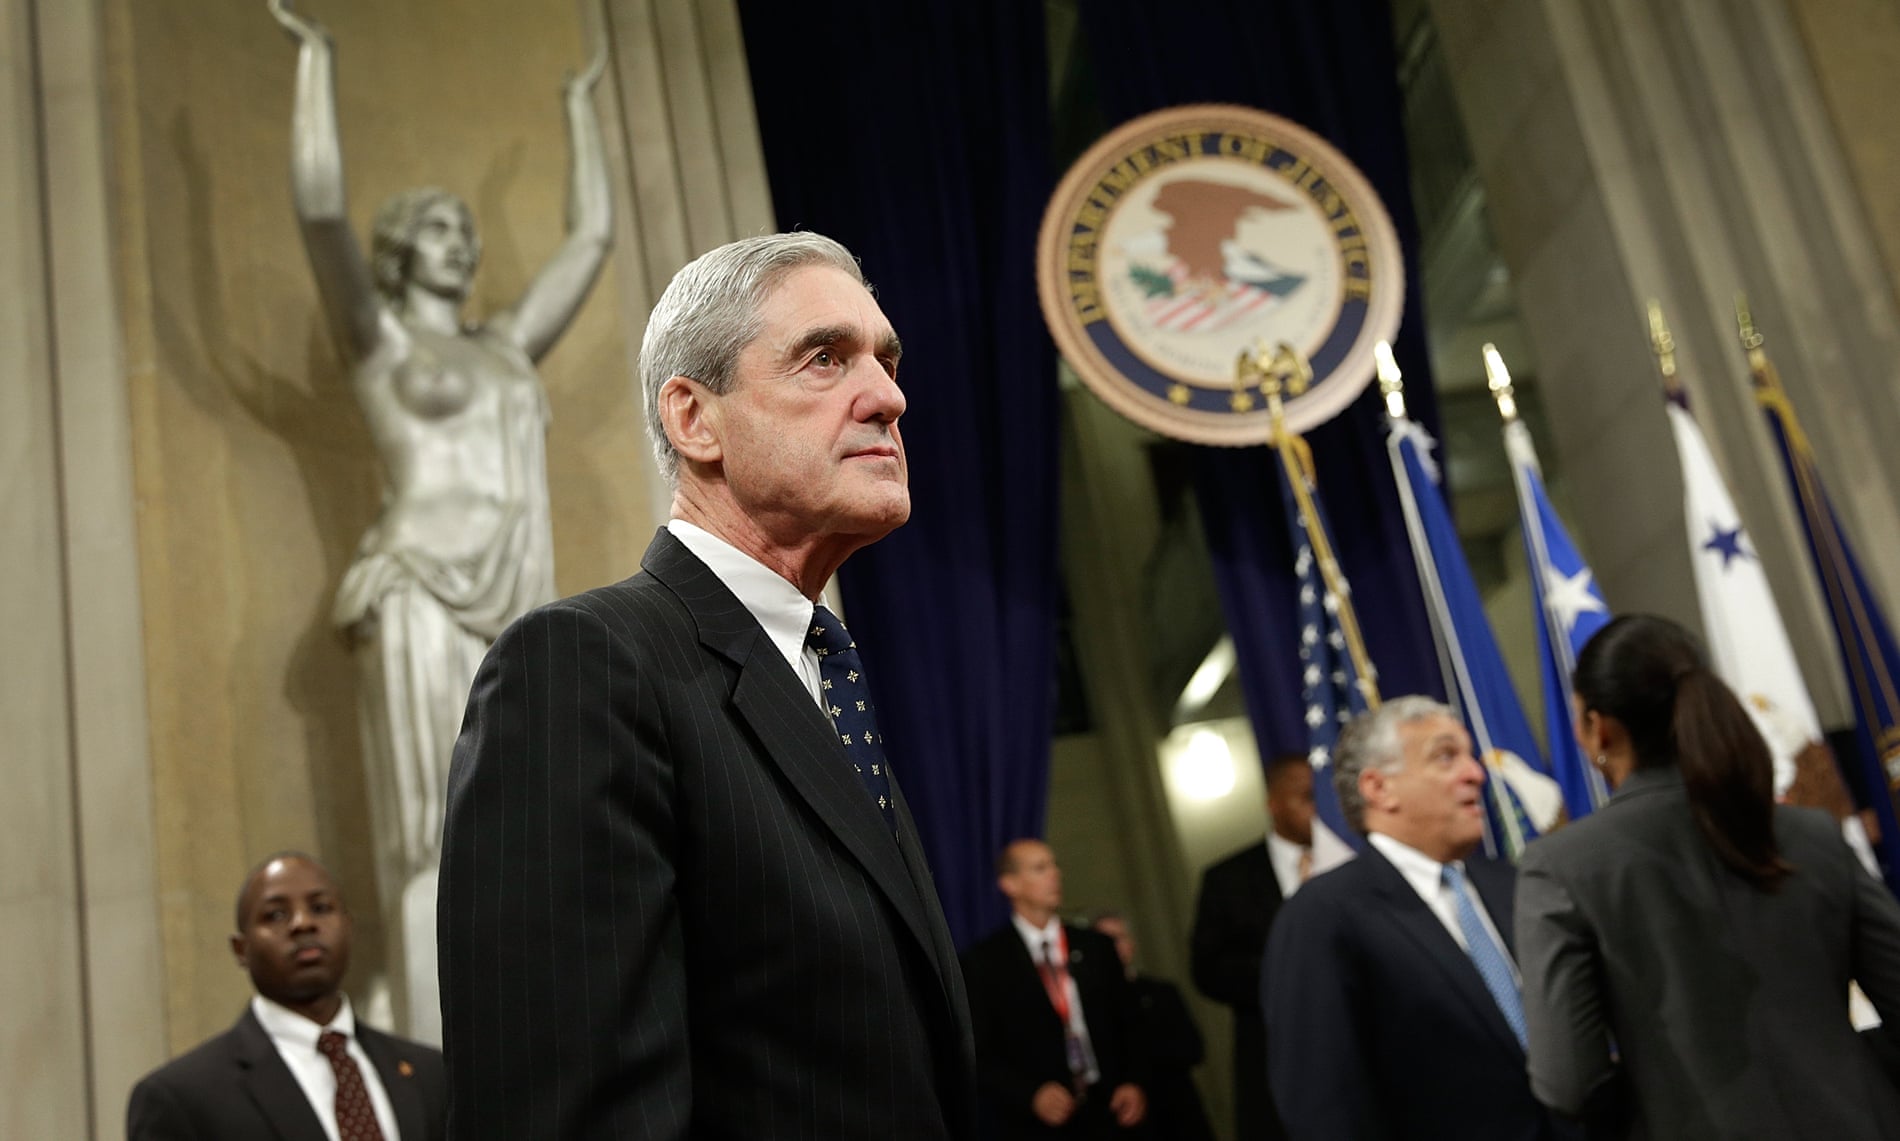 Robert Mueller was appointed special counsel in May, following Trump’s dismissal of FBI director James Comey.